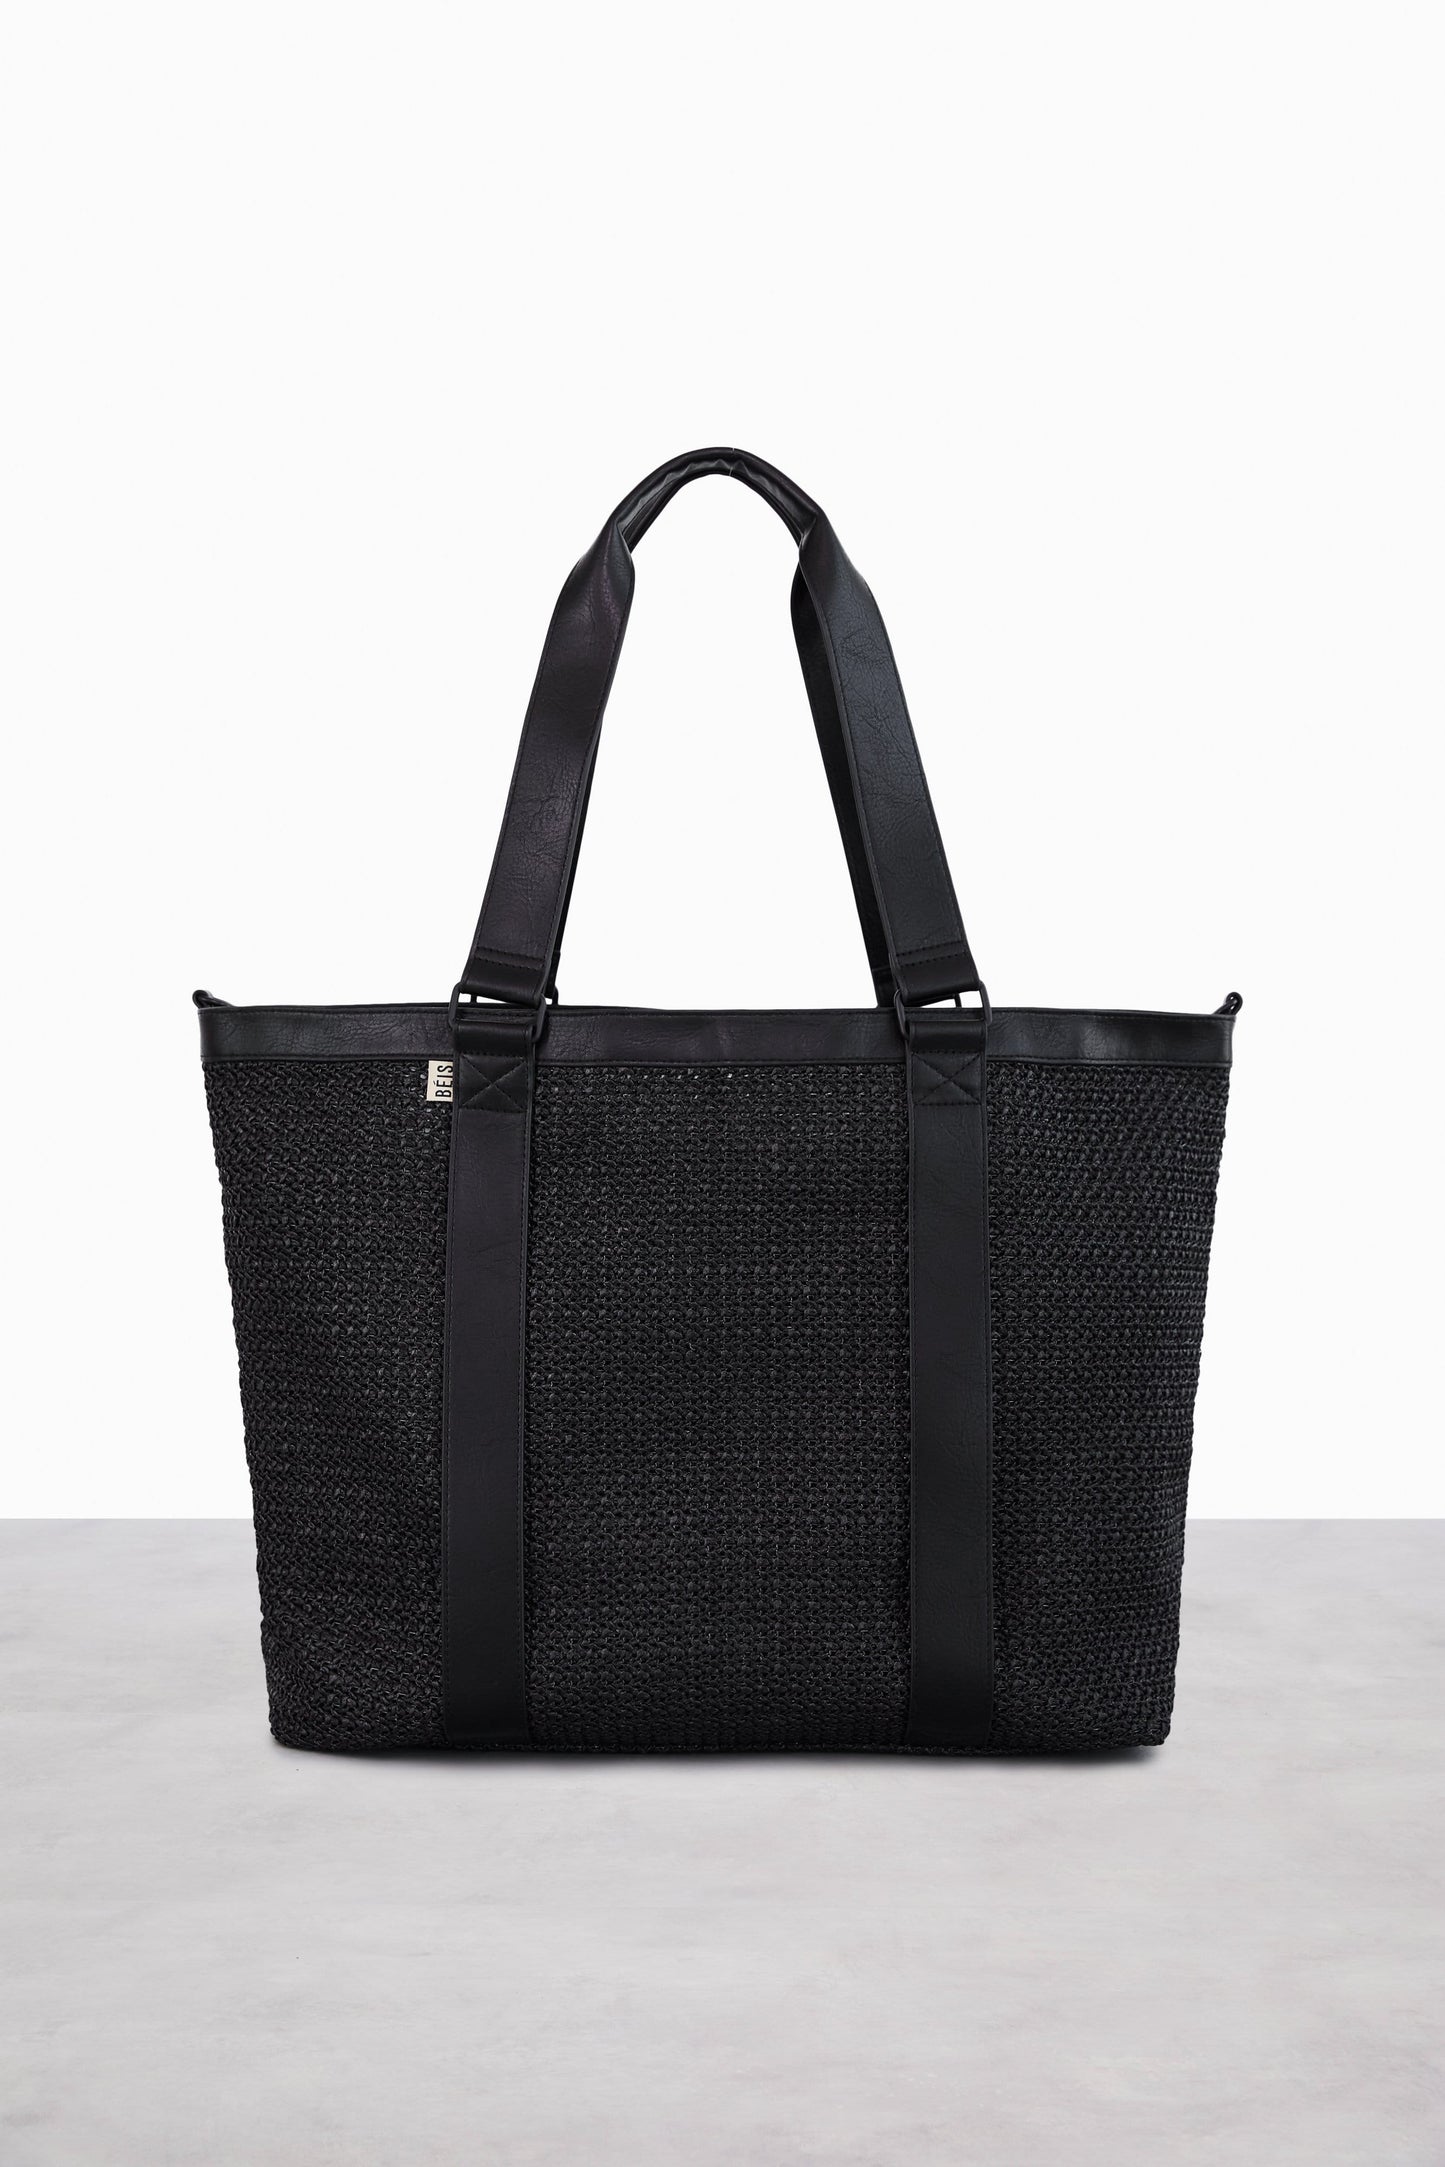 The Naturals Tote in Black